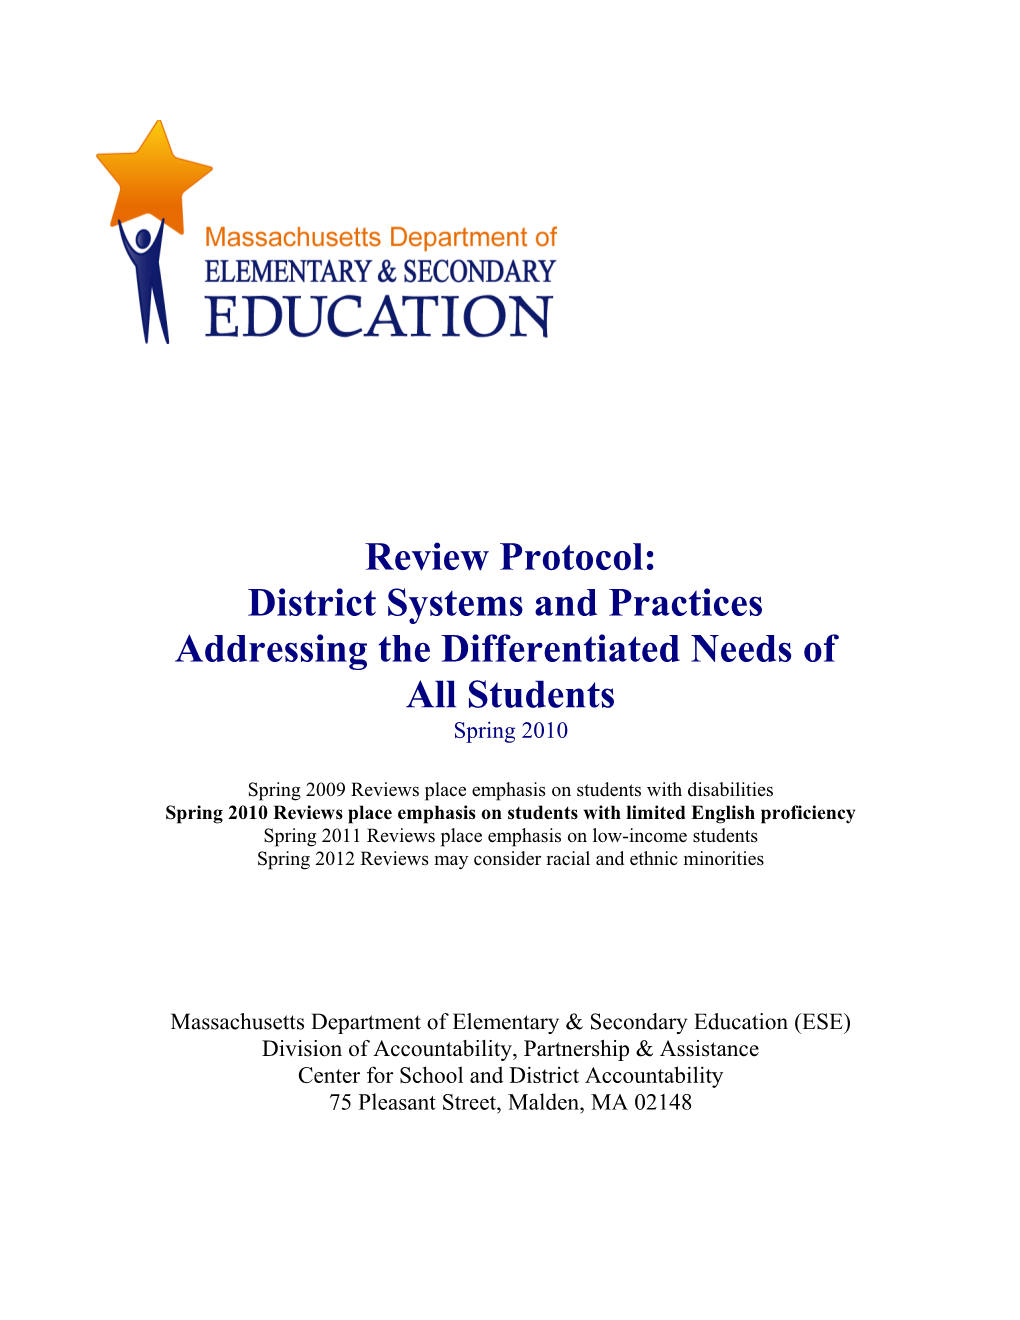 Differentiated Needs (LEP) Review Protocol